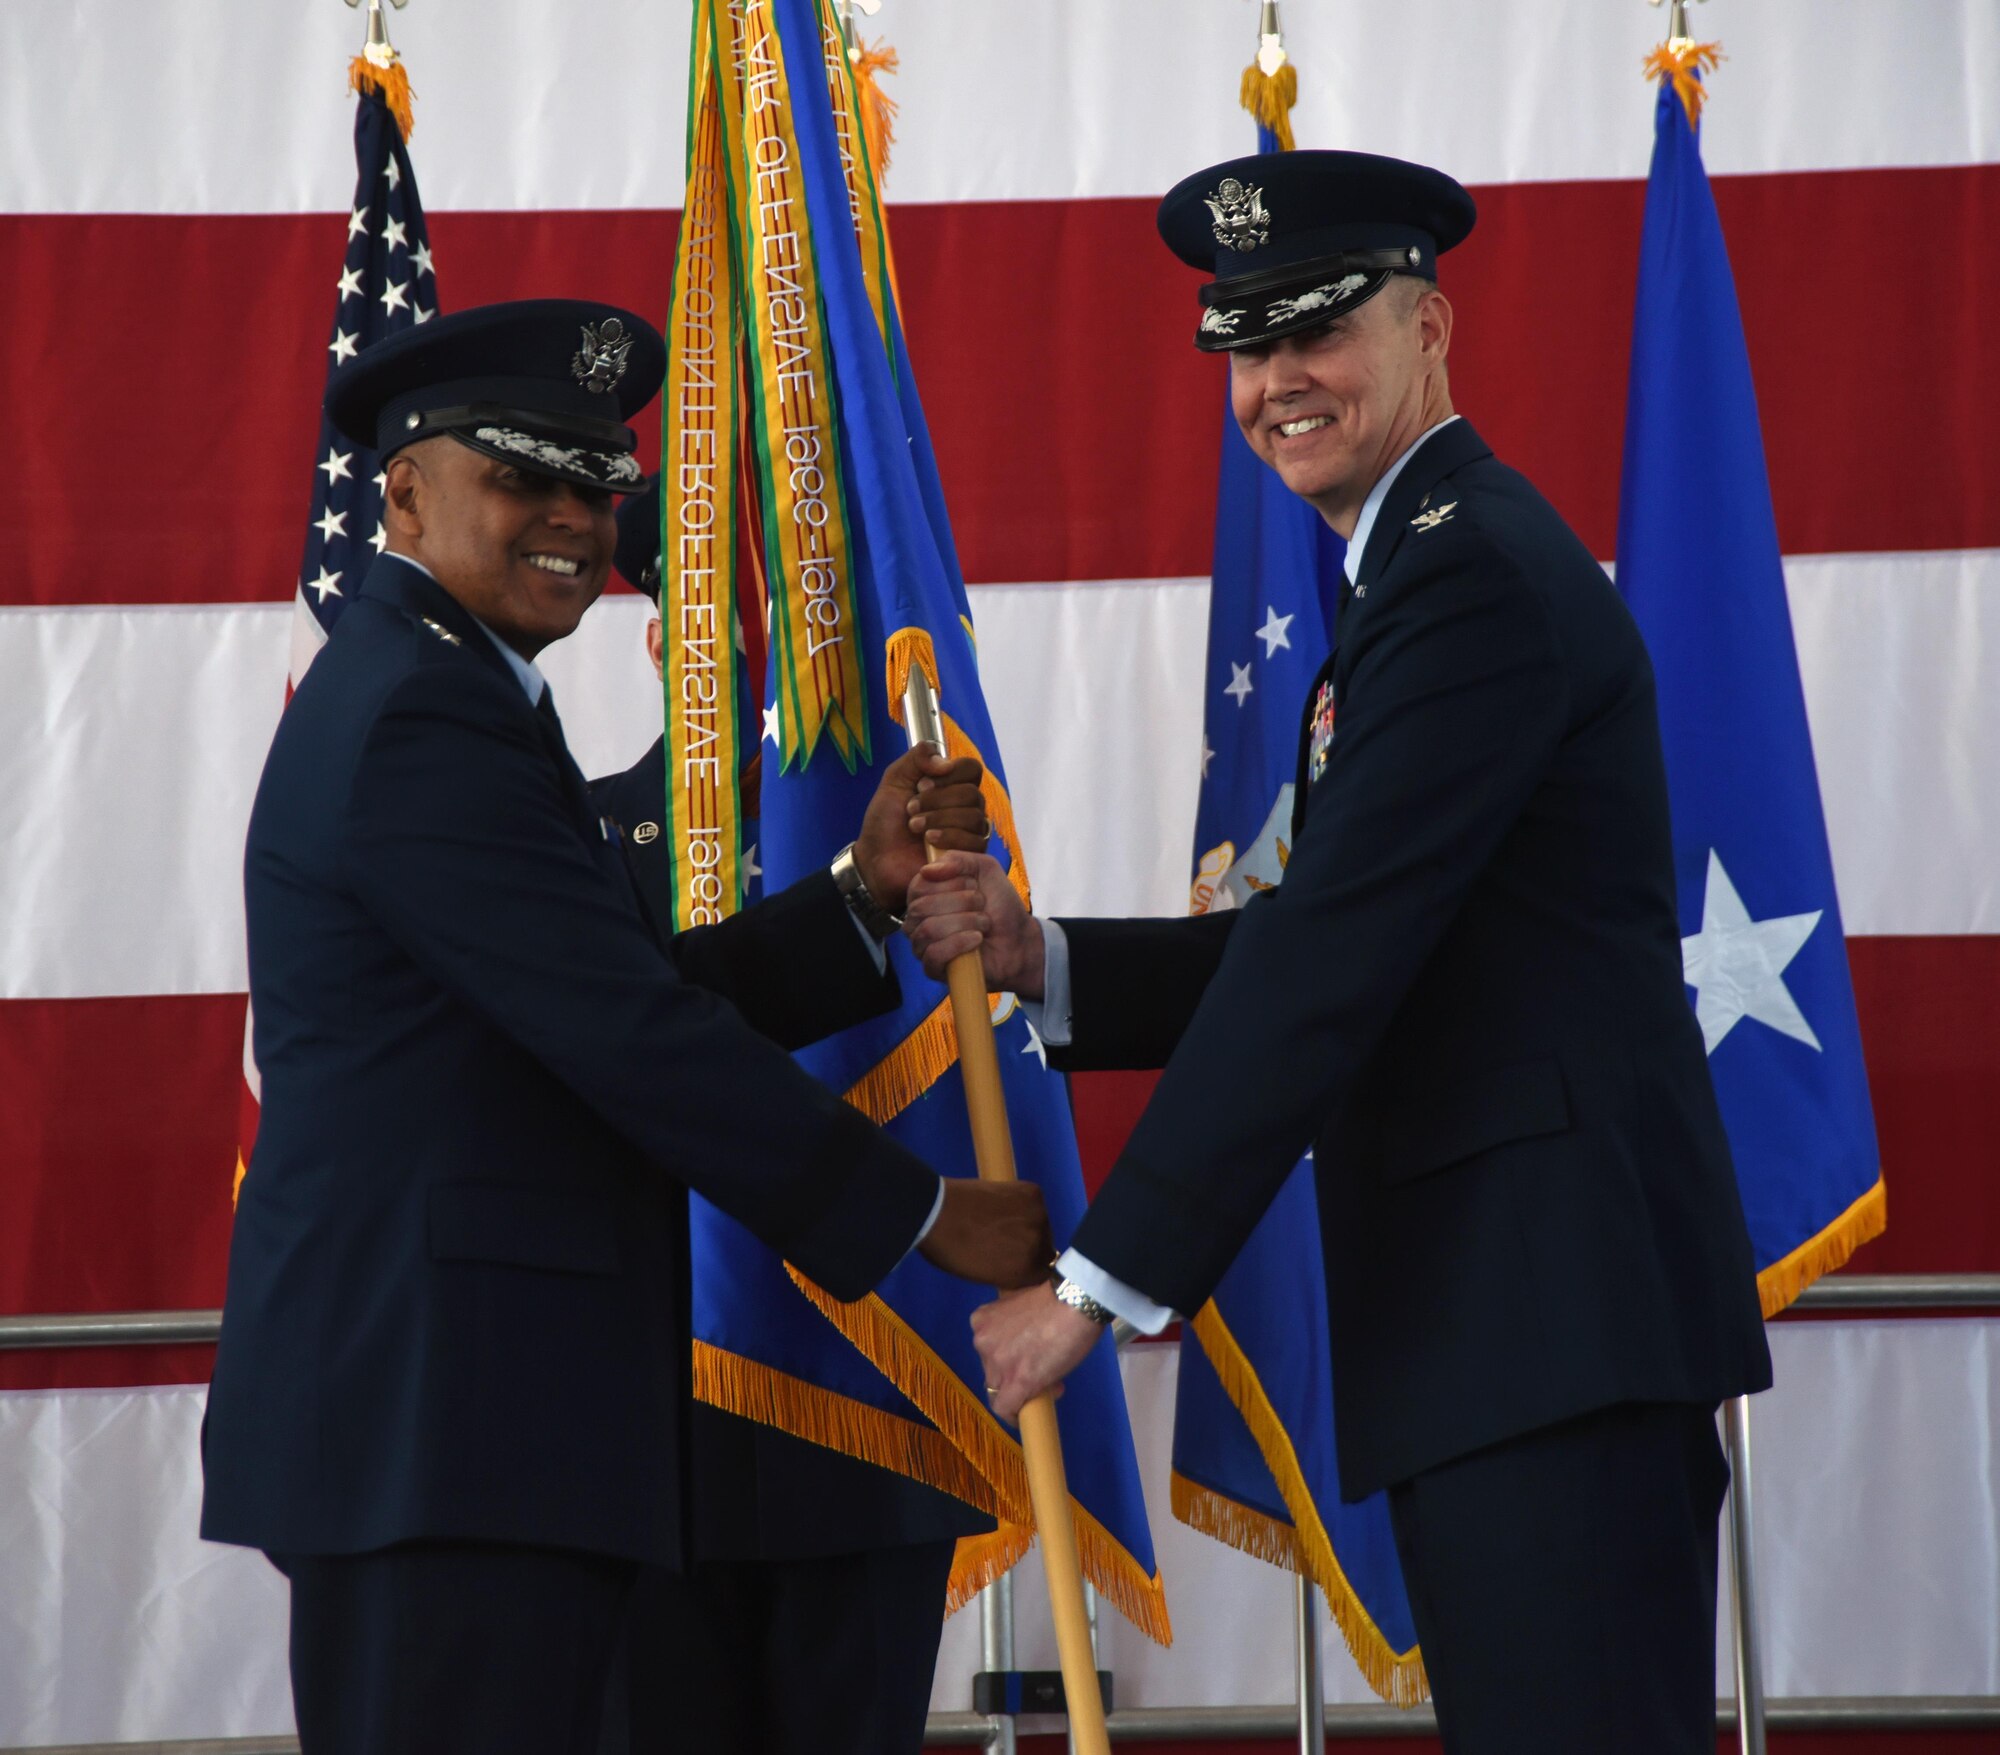 Maj. Gen. Anthony Cotton, 20th Air Force commander, passes the guidon to Col. Richard W. Gibbs, 377th Air Base Wing commander during a change of command ceremony at Kirtland Air Force Base, New Mexico, June 16. Gibbs takes command from Col Eric H. Froehlich, who commanded the host unit of Kirtland for two years. (U.S. Air Force photo by Senior Airman Chandler Baker)